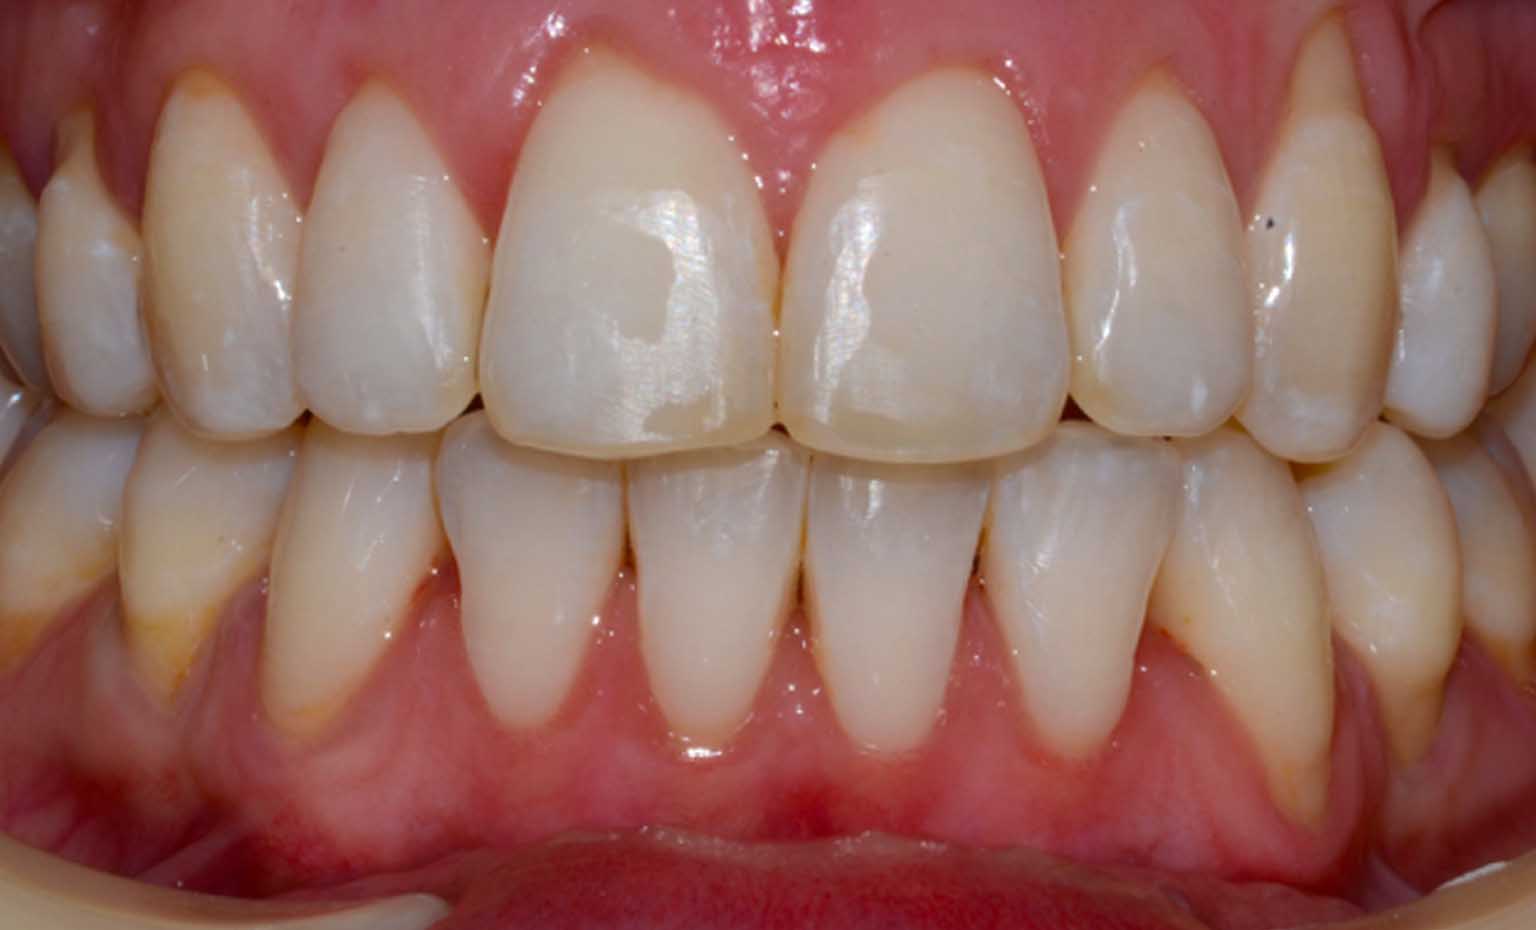 after photos of teeth straightening and whitening treatment